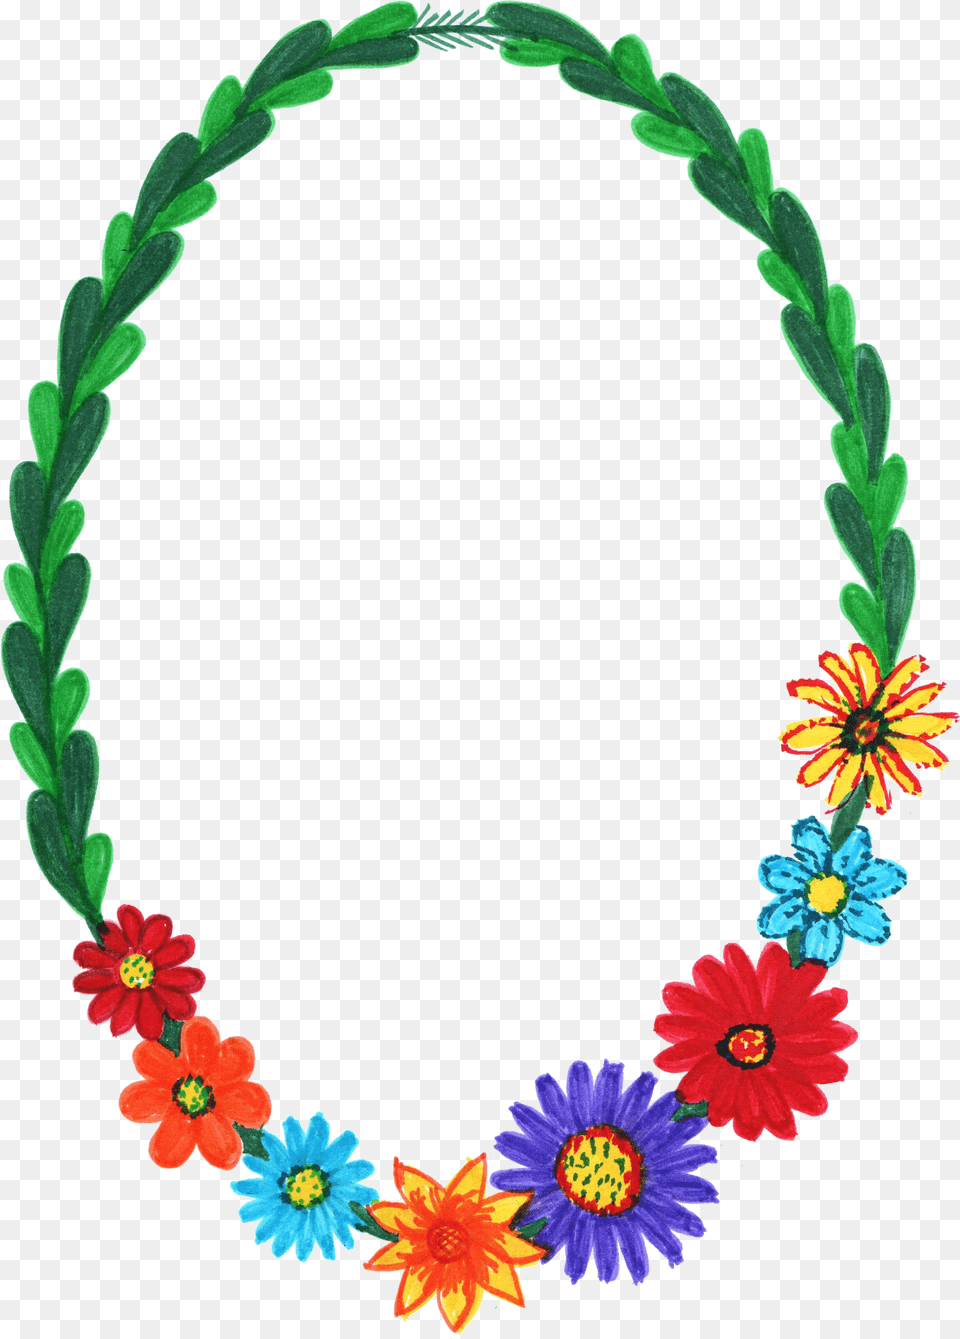 Download Flower Oval Frames And Borders, Accessories, Jewelry, Necklace, Plant Png Image